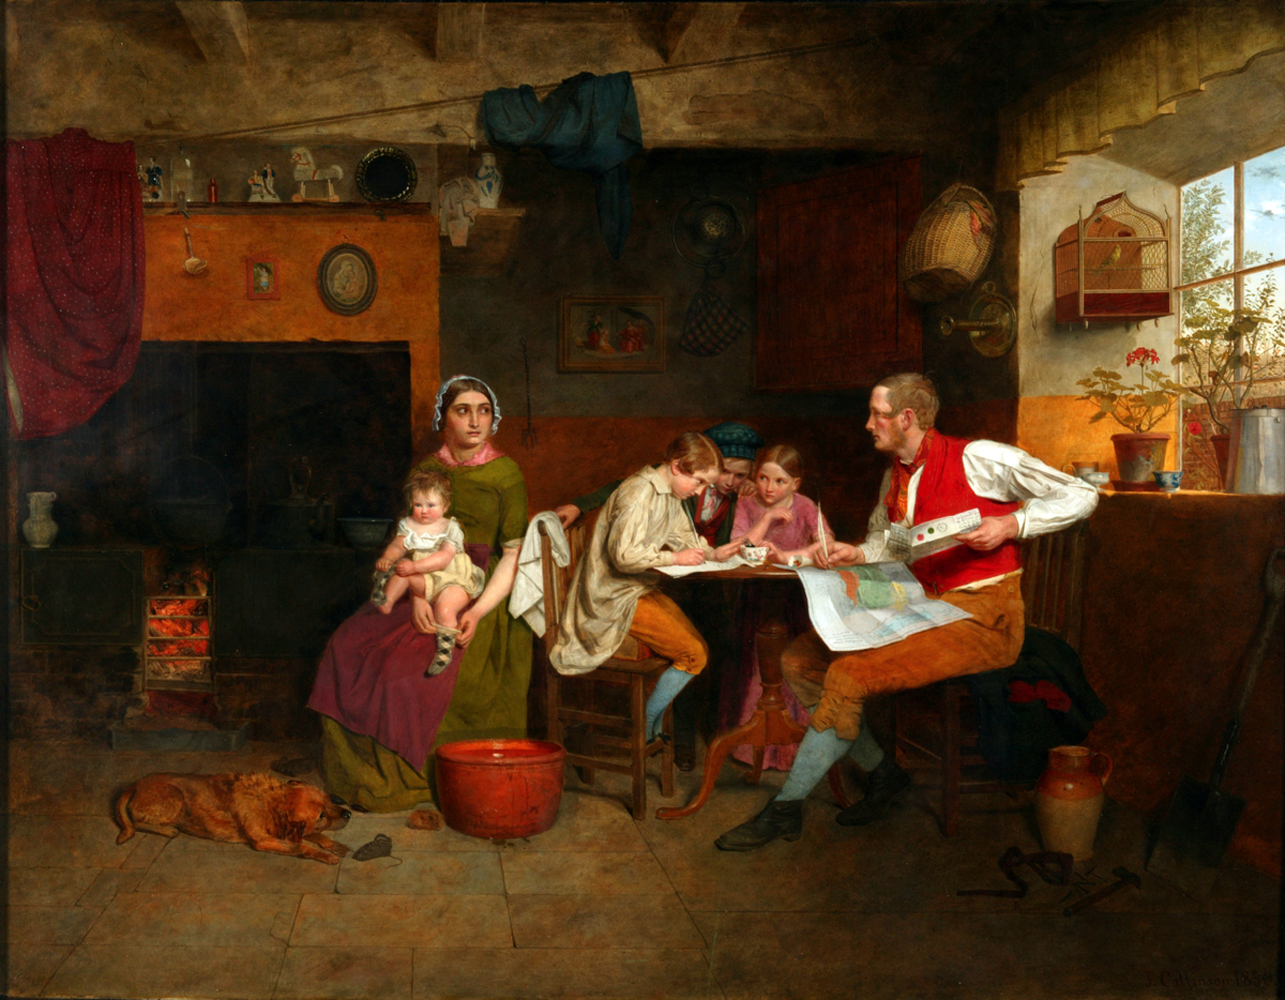 Painting showing family writing a letter, with mantelpiece in background